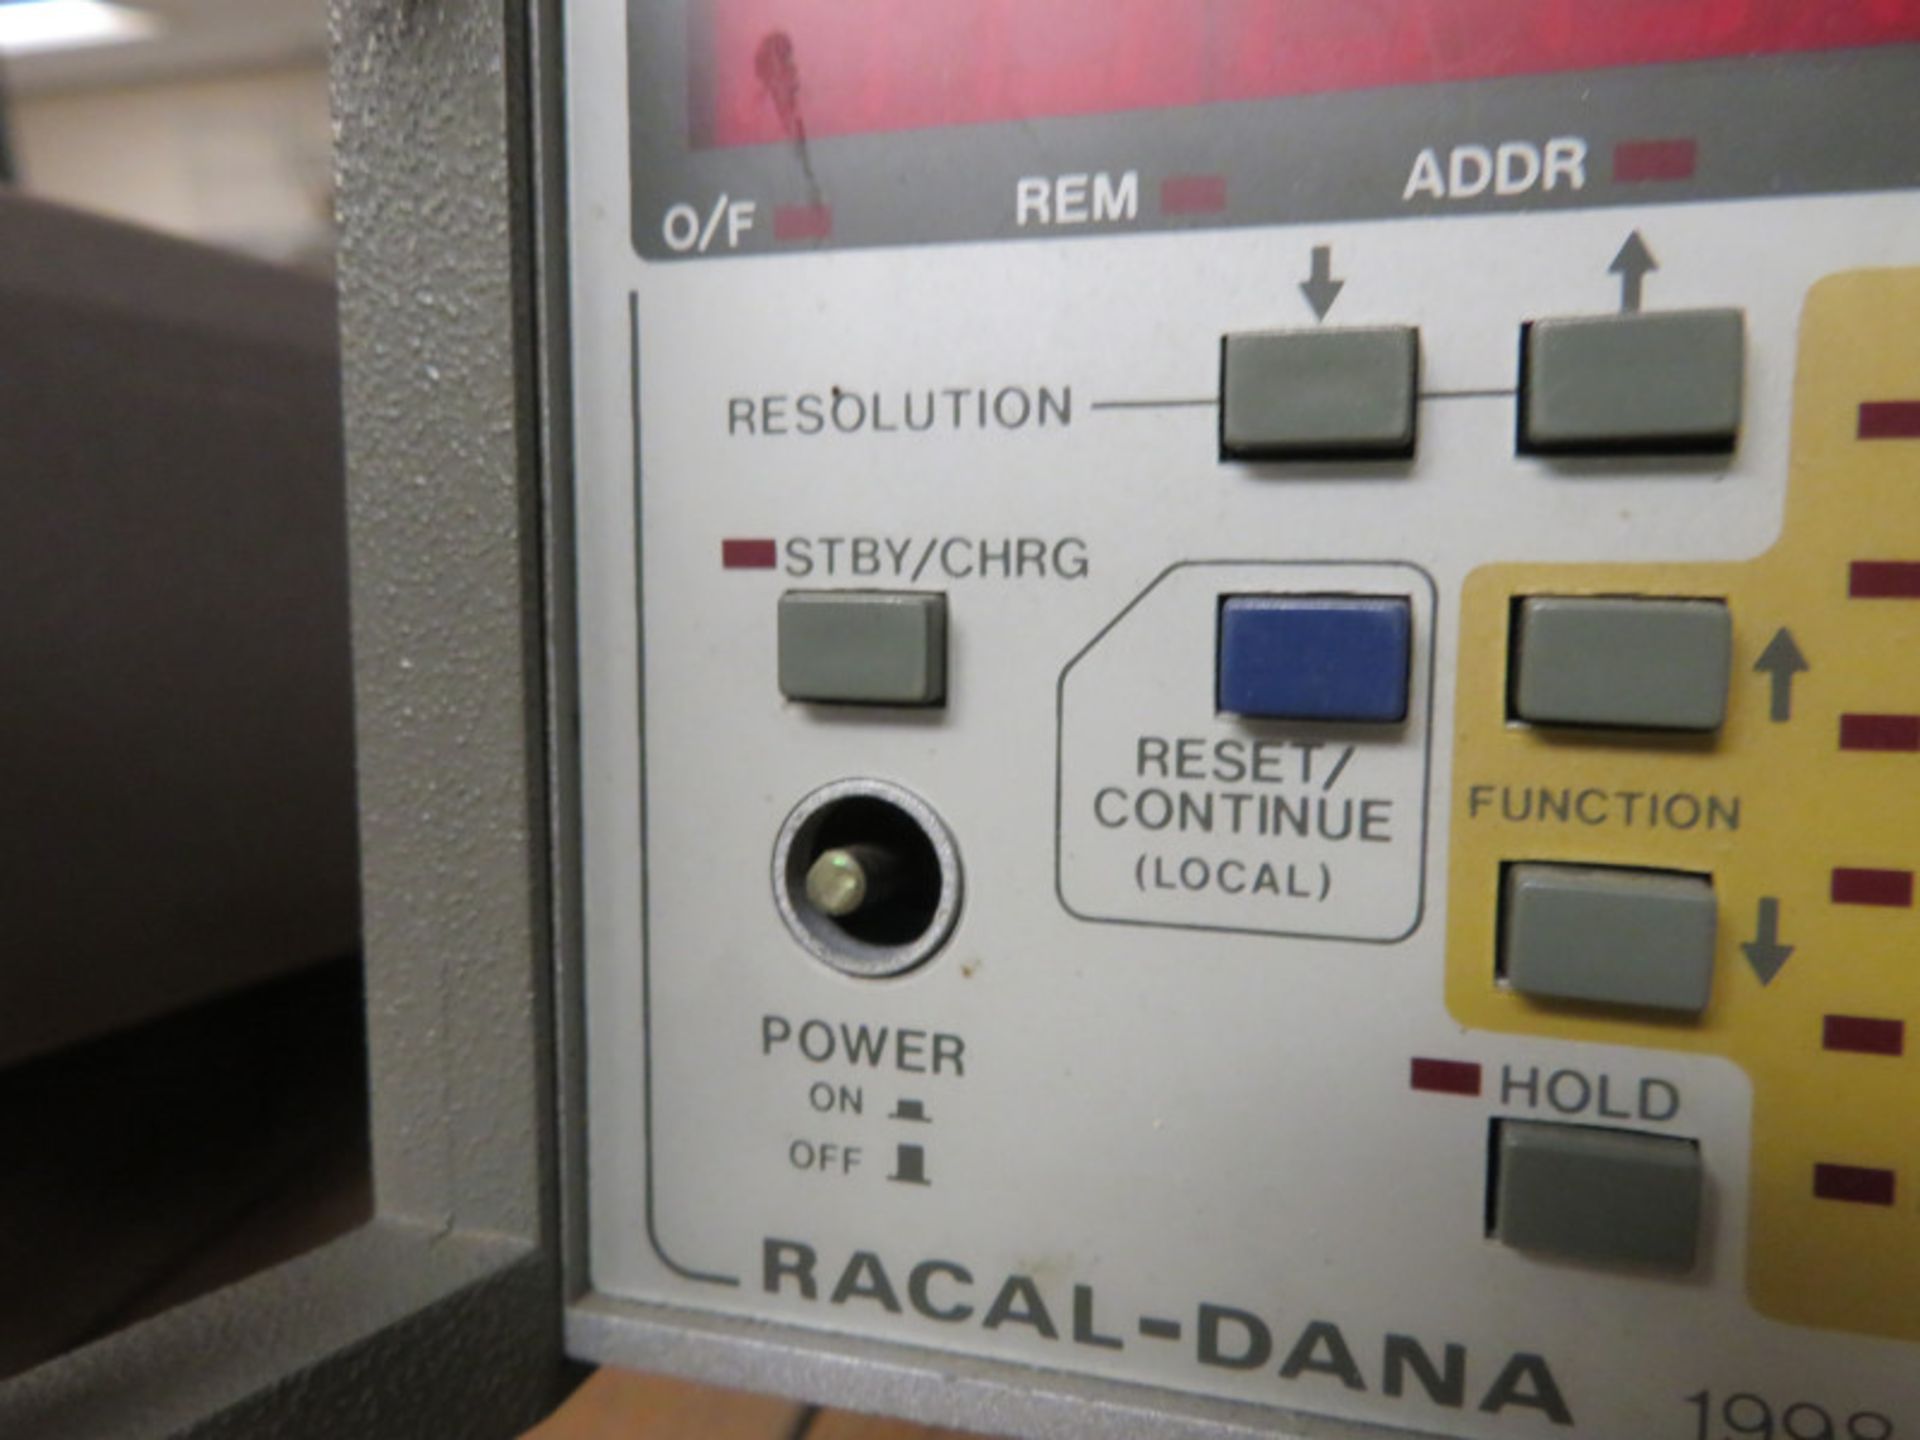 Racal-Dana 1998 Frequency Counter - Missing Power Button - Image 2 of 3